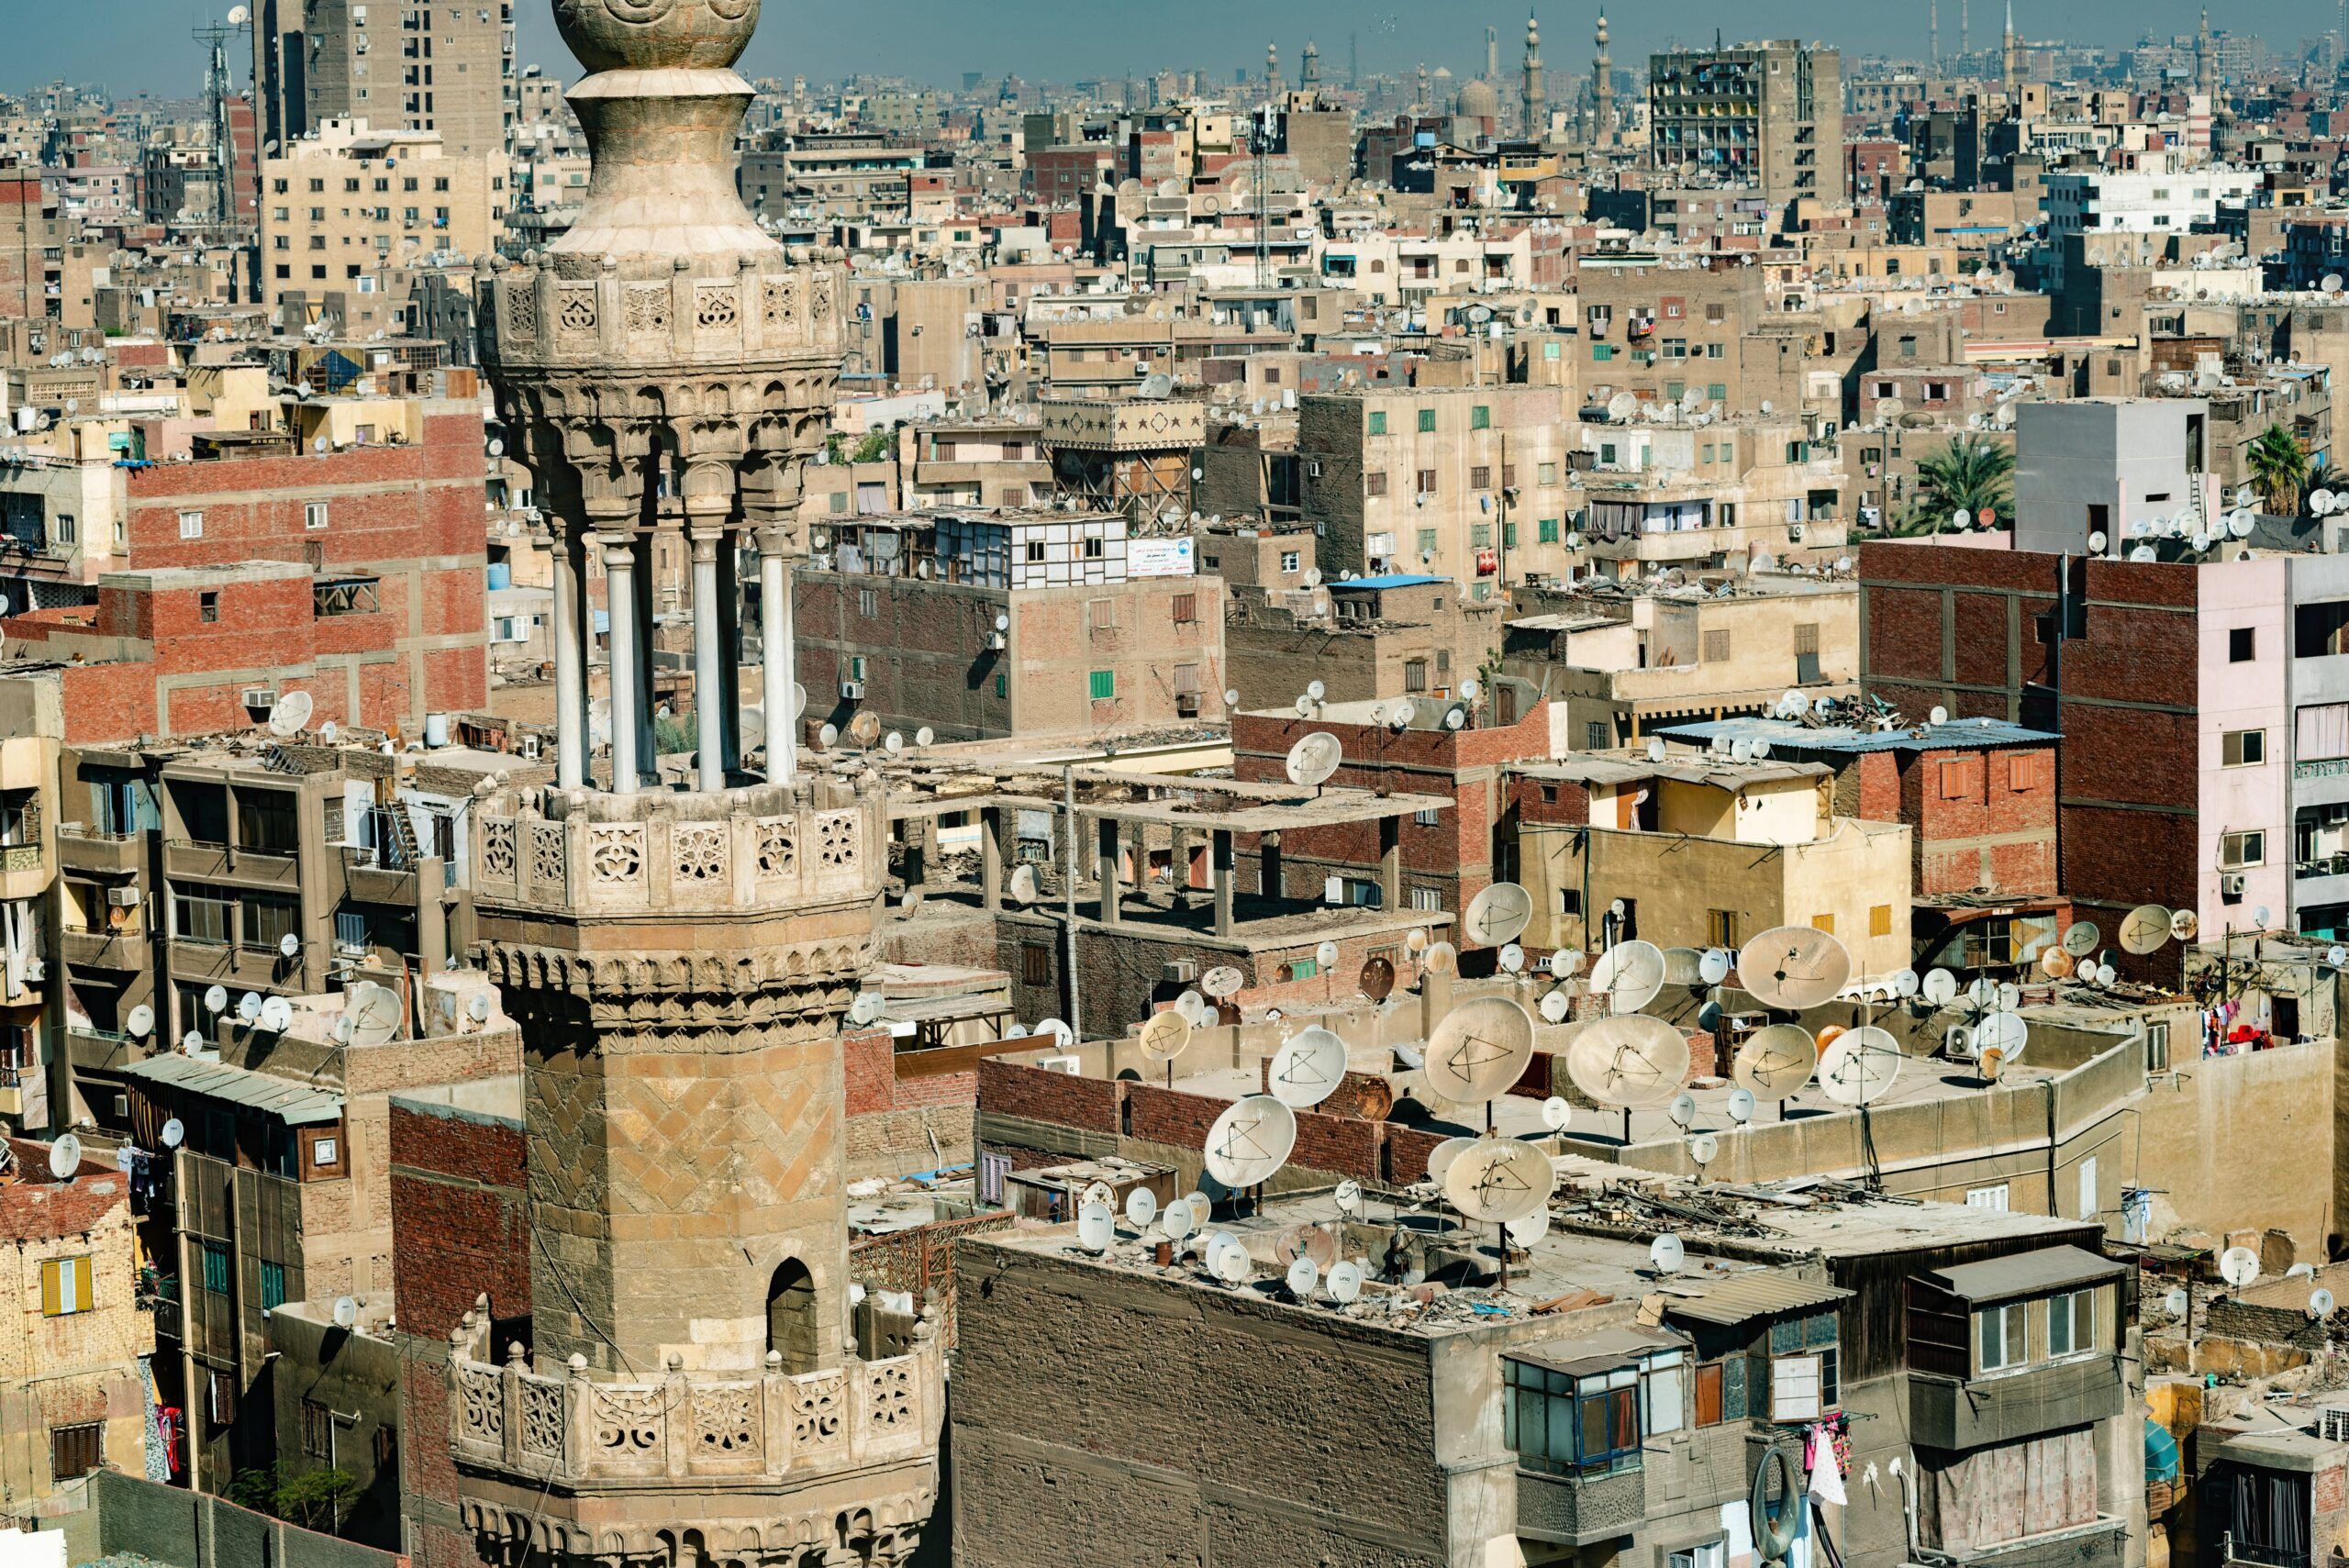 Islamic mosque minaret in front of crowded aerial cityscape view of Cairo, the densely populated capital of Egypt, Africa